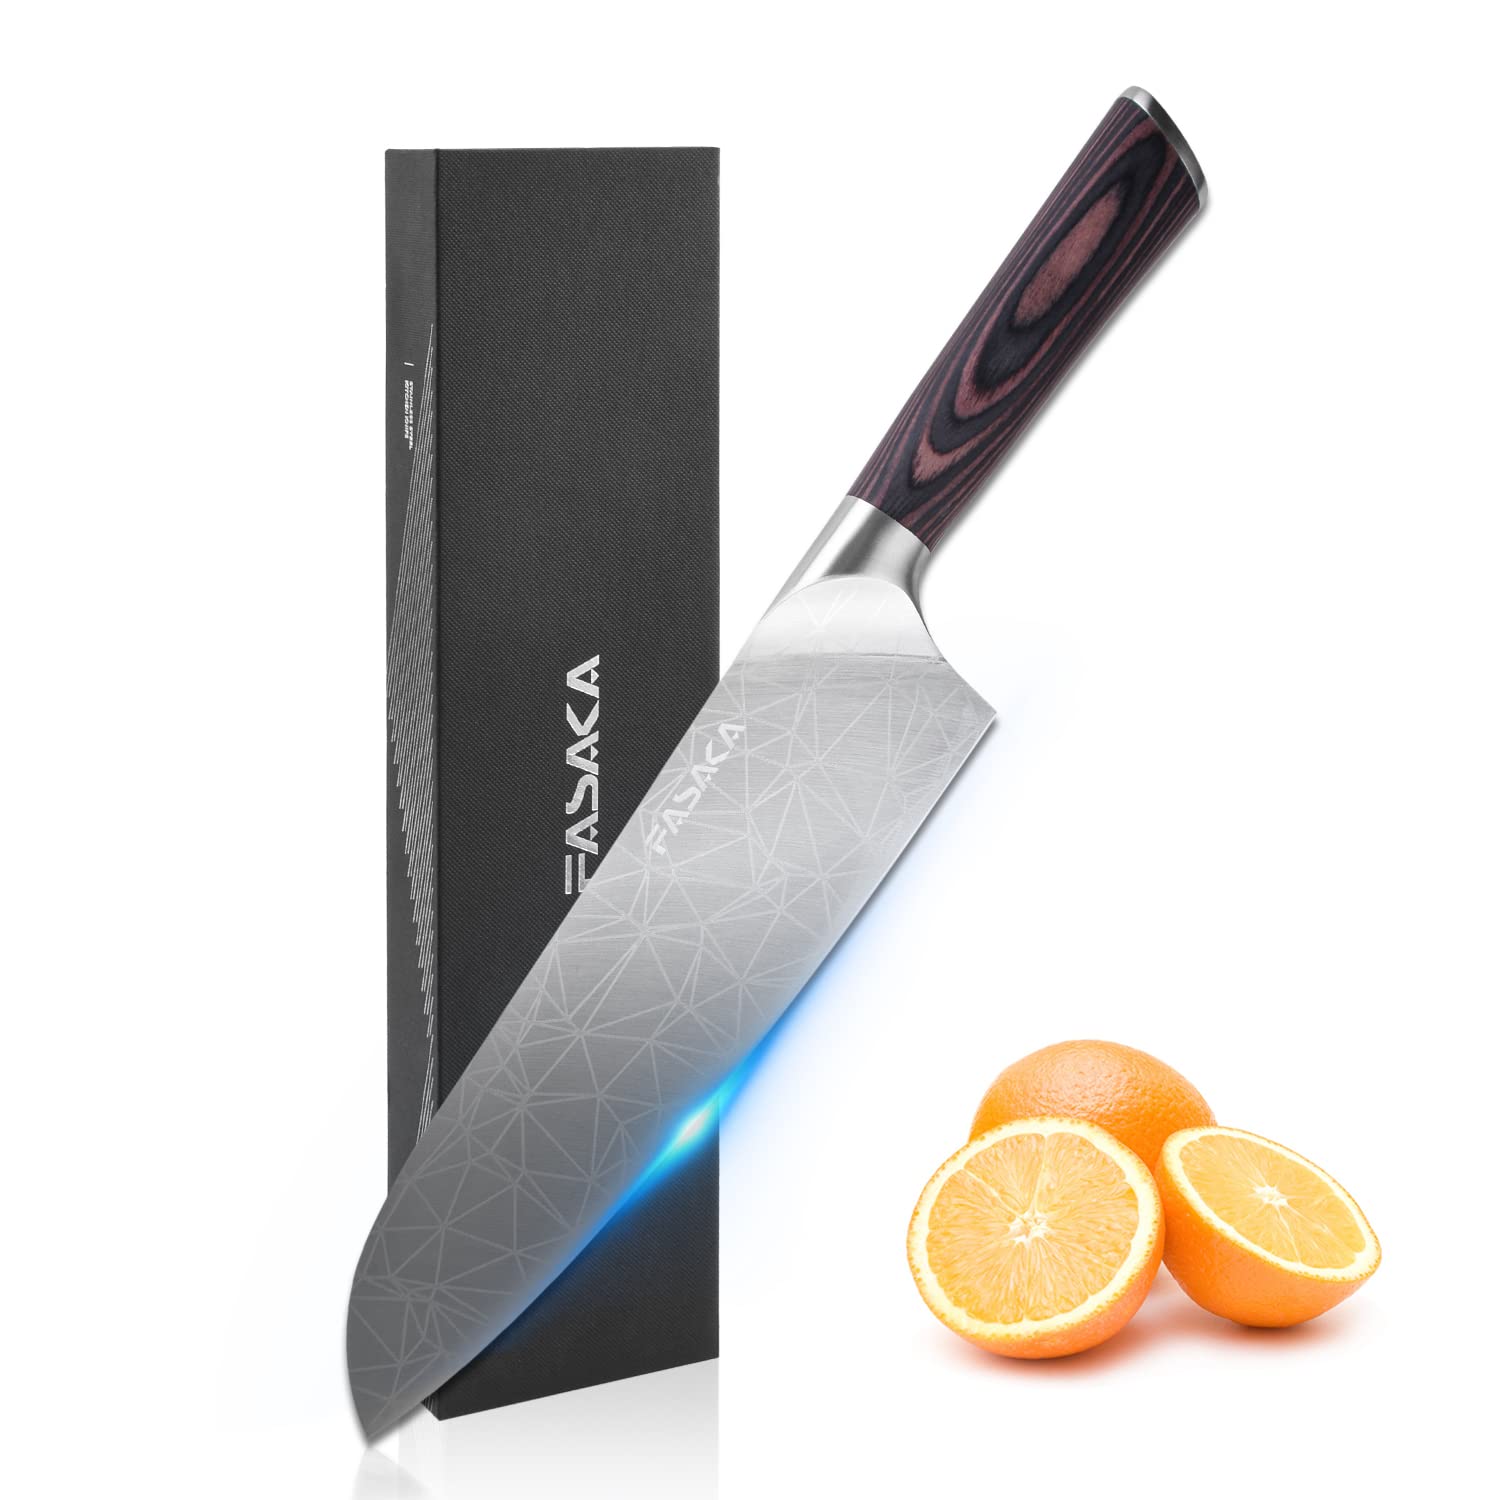 FASAKA 8 inch Santoku Knife, Japanese Chef Knife, Professional Knife for Kitchen, German High Carbon Stainless Steel Full Tang Handle Sharp Durable Kitchen Knife Ideal for Housewarming Gift